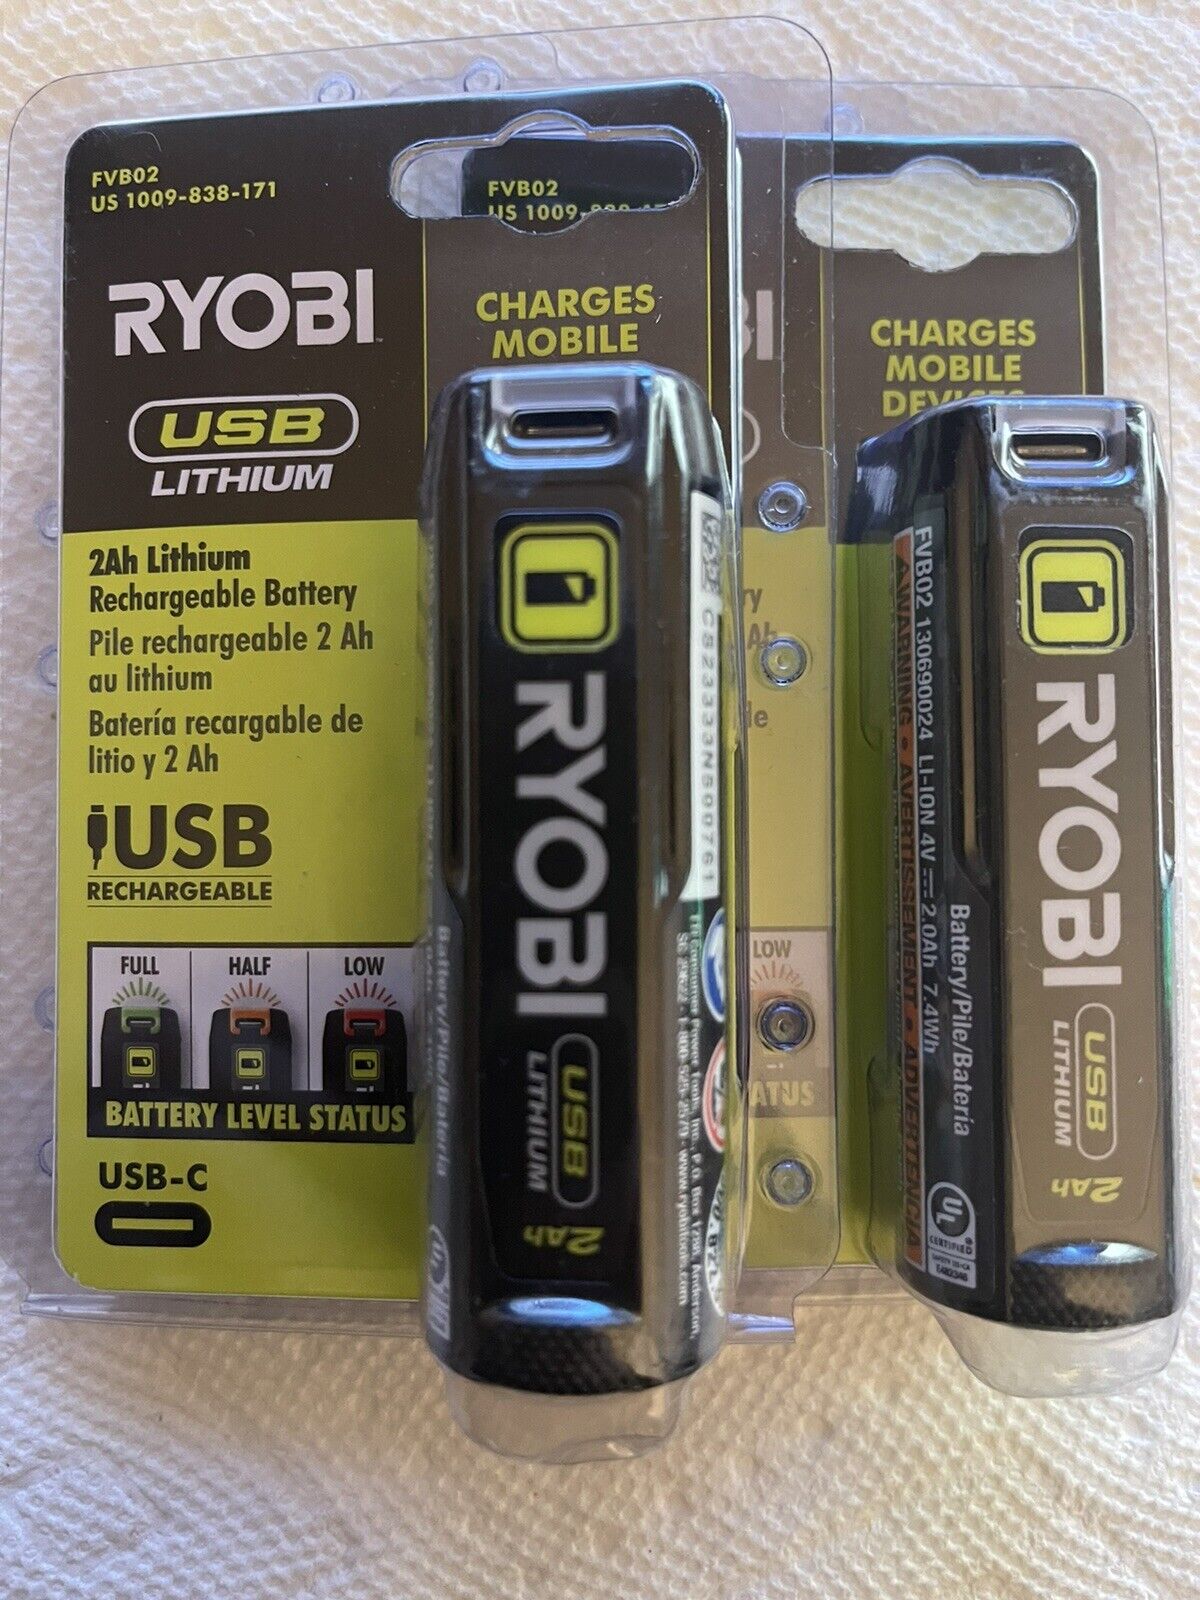 Ryobi 2Ah Lithium Rechargeable Battery 2-Pack FVB02 New